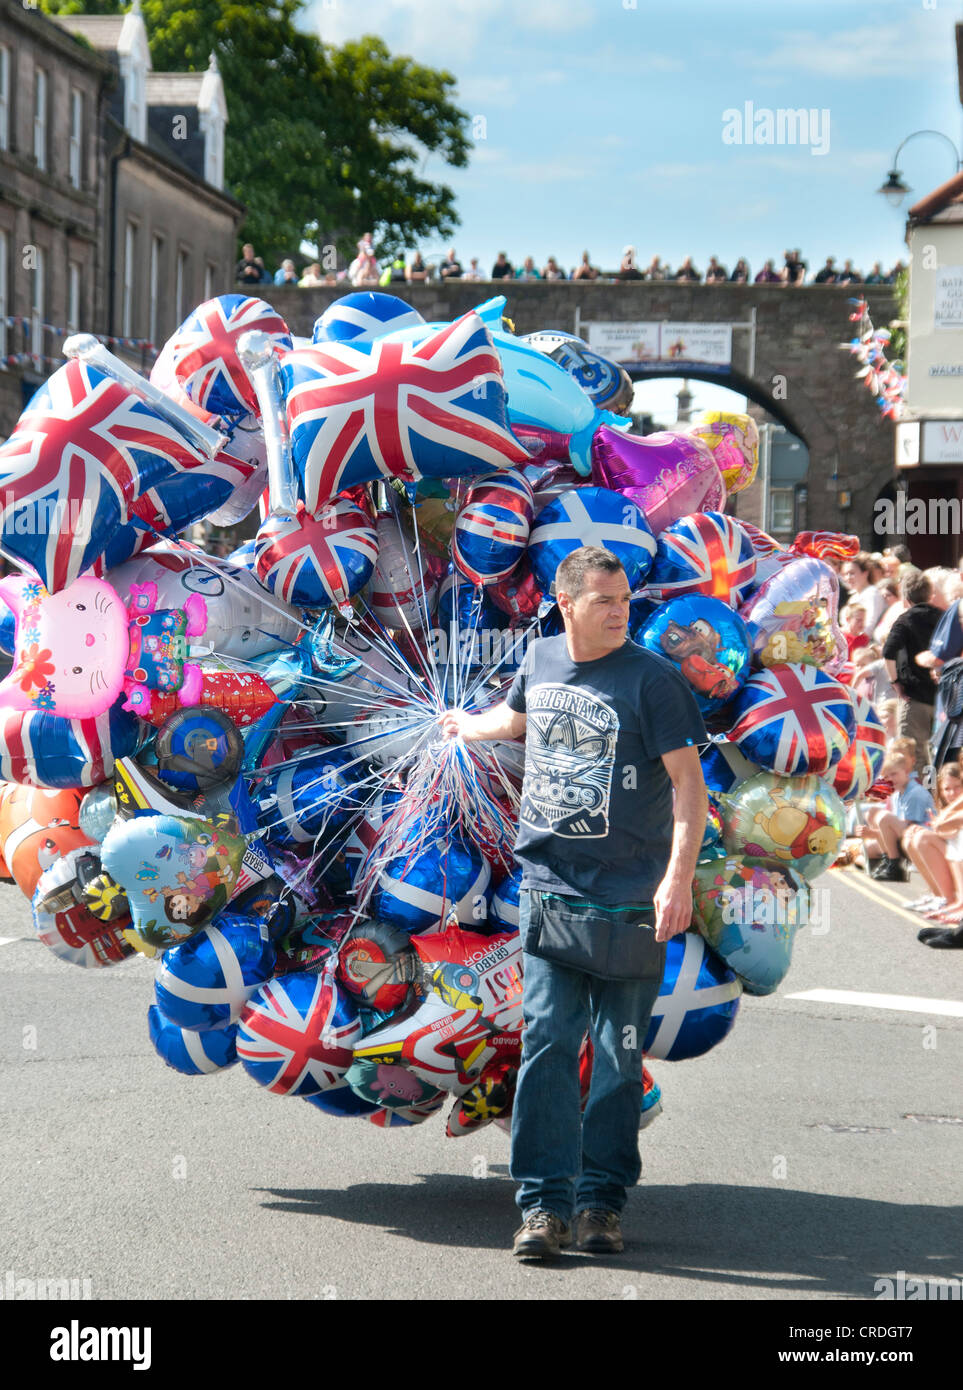 Ballon seller during the built up to the Olympic Torch Relay Berwick upon Tweed Stock Photo